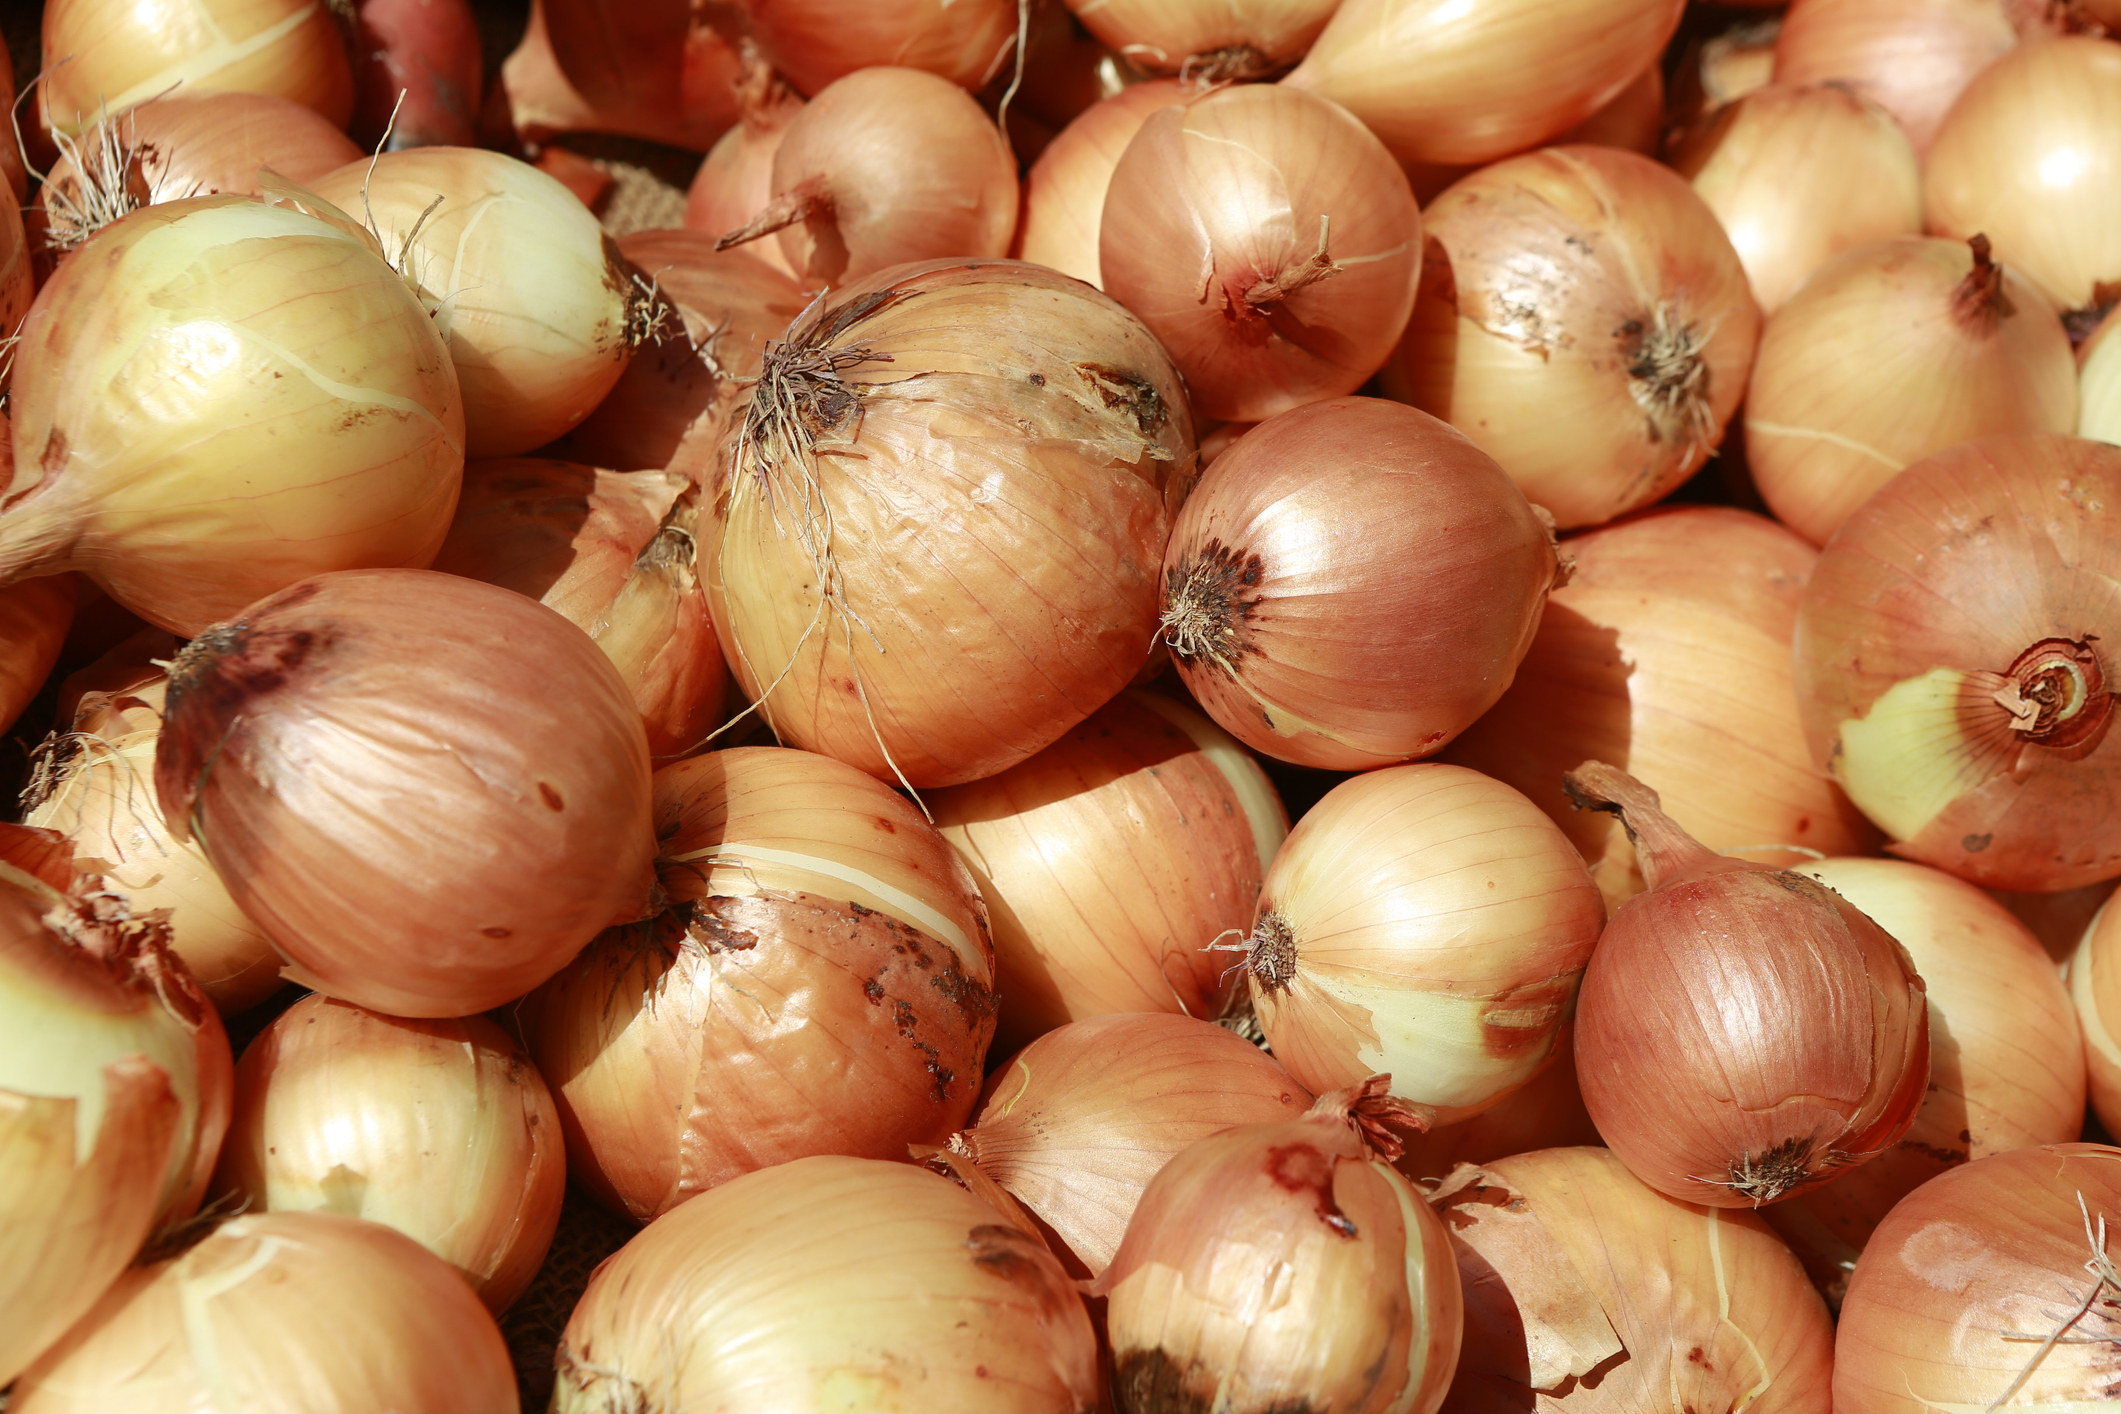 A pile of yellow onions for sale